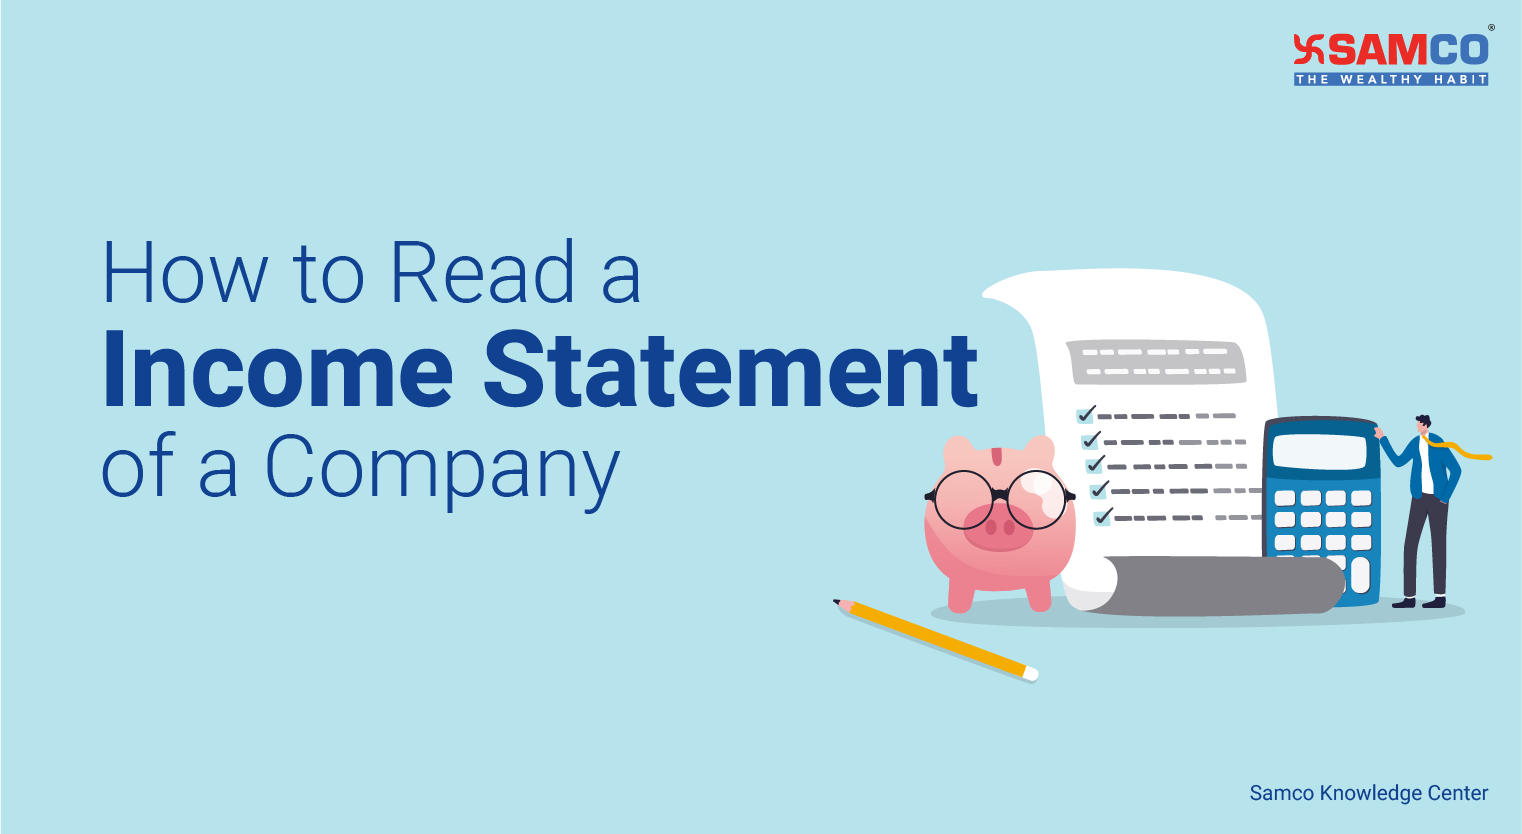 How to Read an Income Statement of a Company